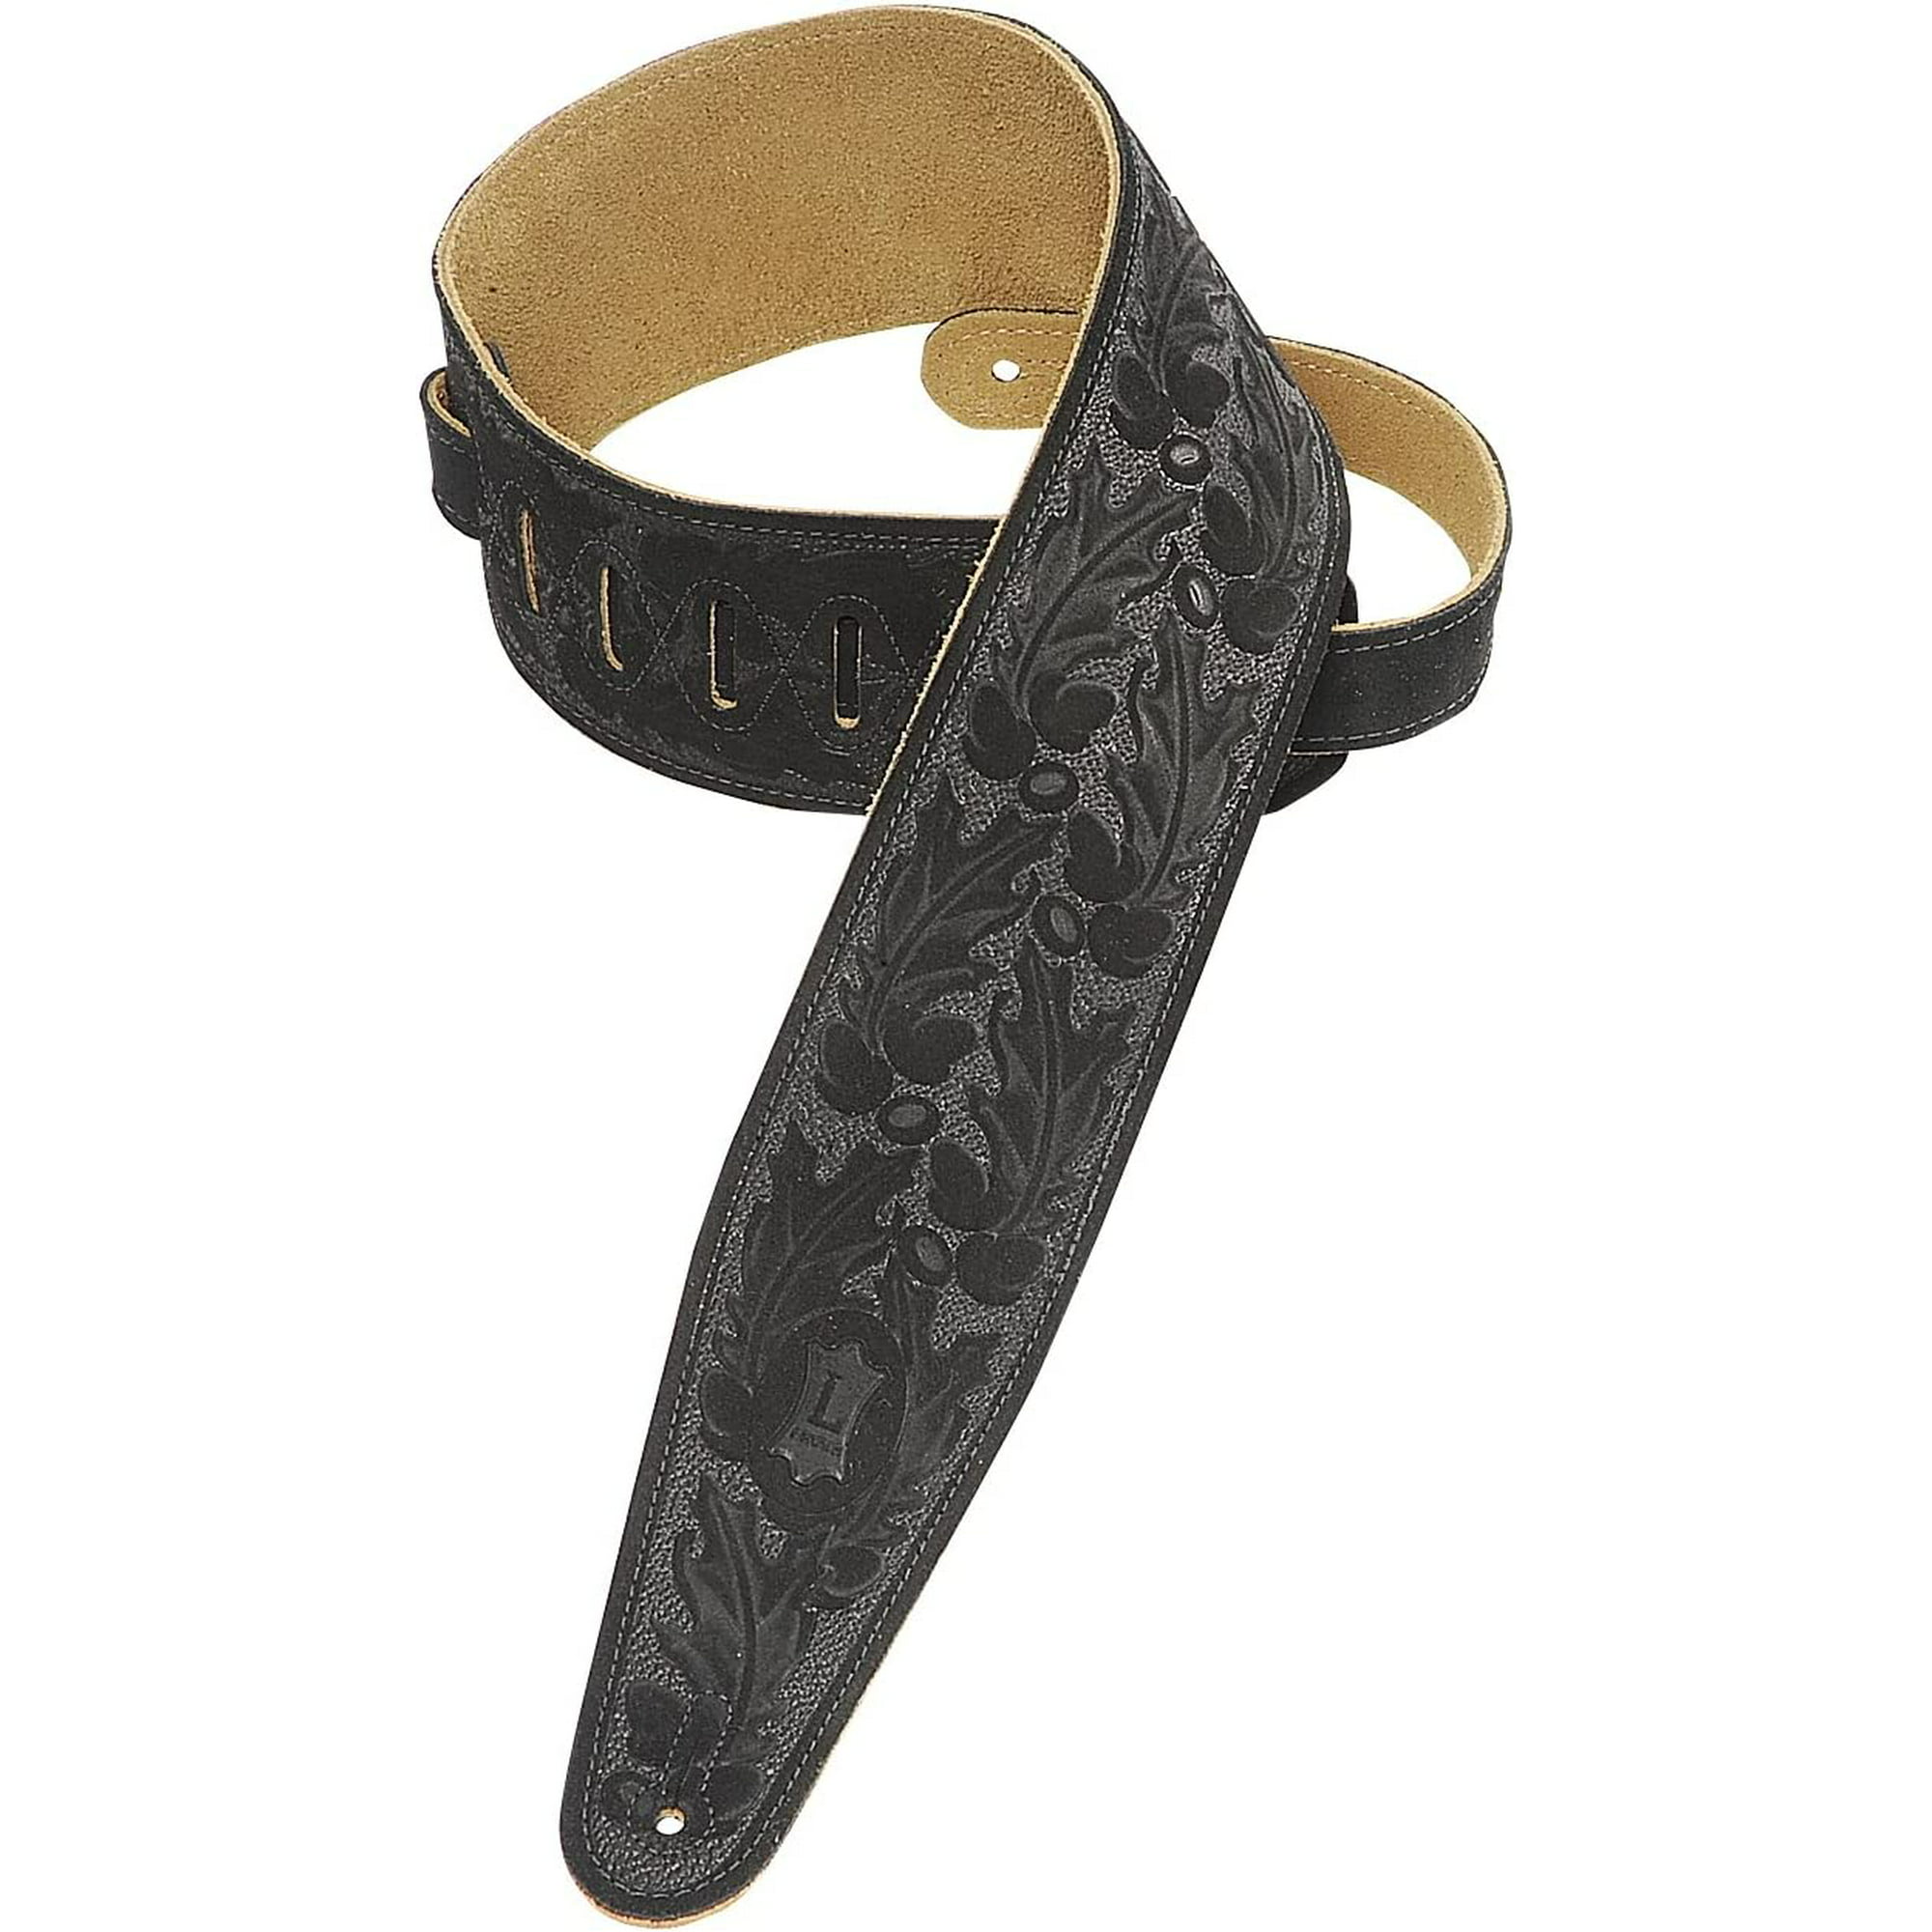 Levy's Leathers PMS44T01-BLK 3-inch Suede-Leather Guitar Strap Too with an  Acorn and Oak-leaves Pattern,Black | Walmart Canada